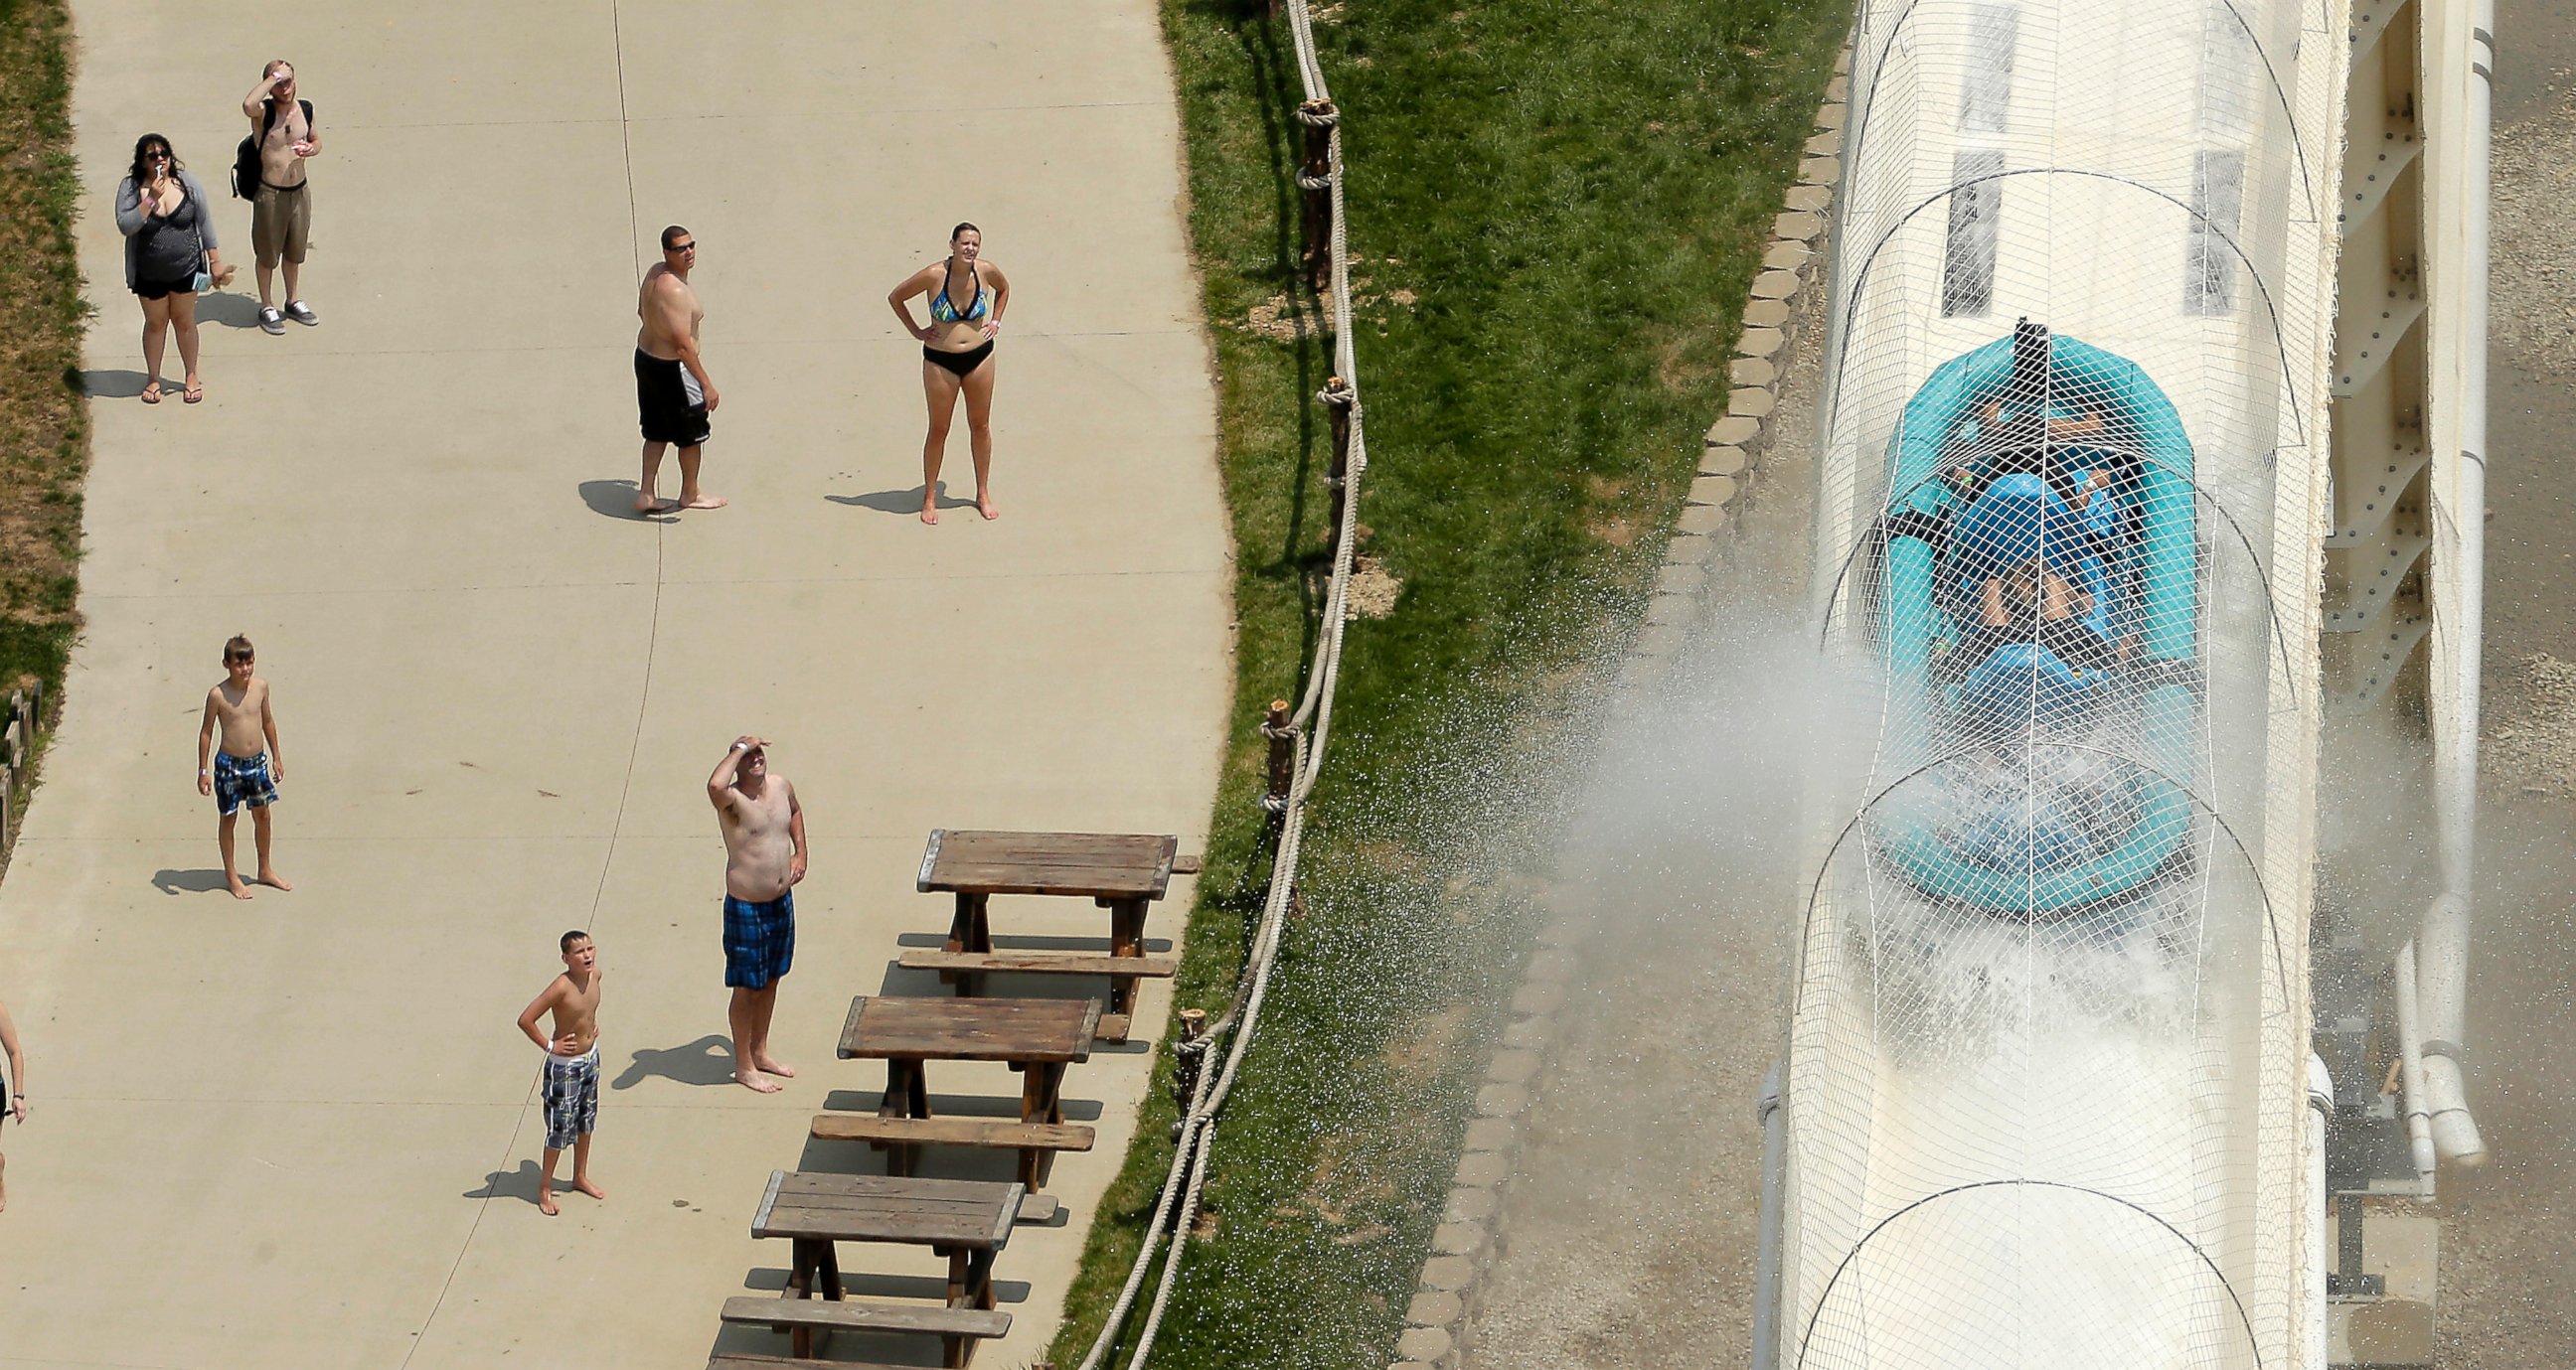 PHOTO:In this July 9, 2014 file photo, riders are propelled by jets of water as they go over a hump while riding a water slide called "Verruckt" at Schlitterbahn Waterpark in Kansas City, Kan. 